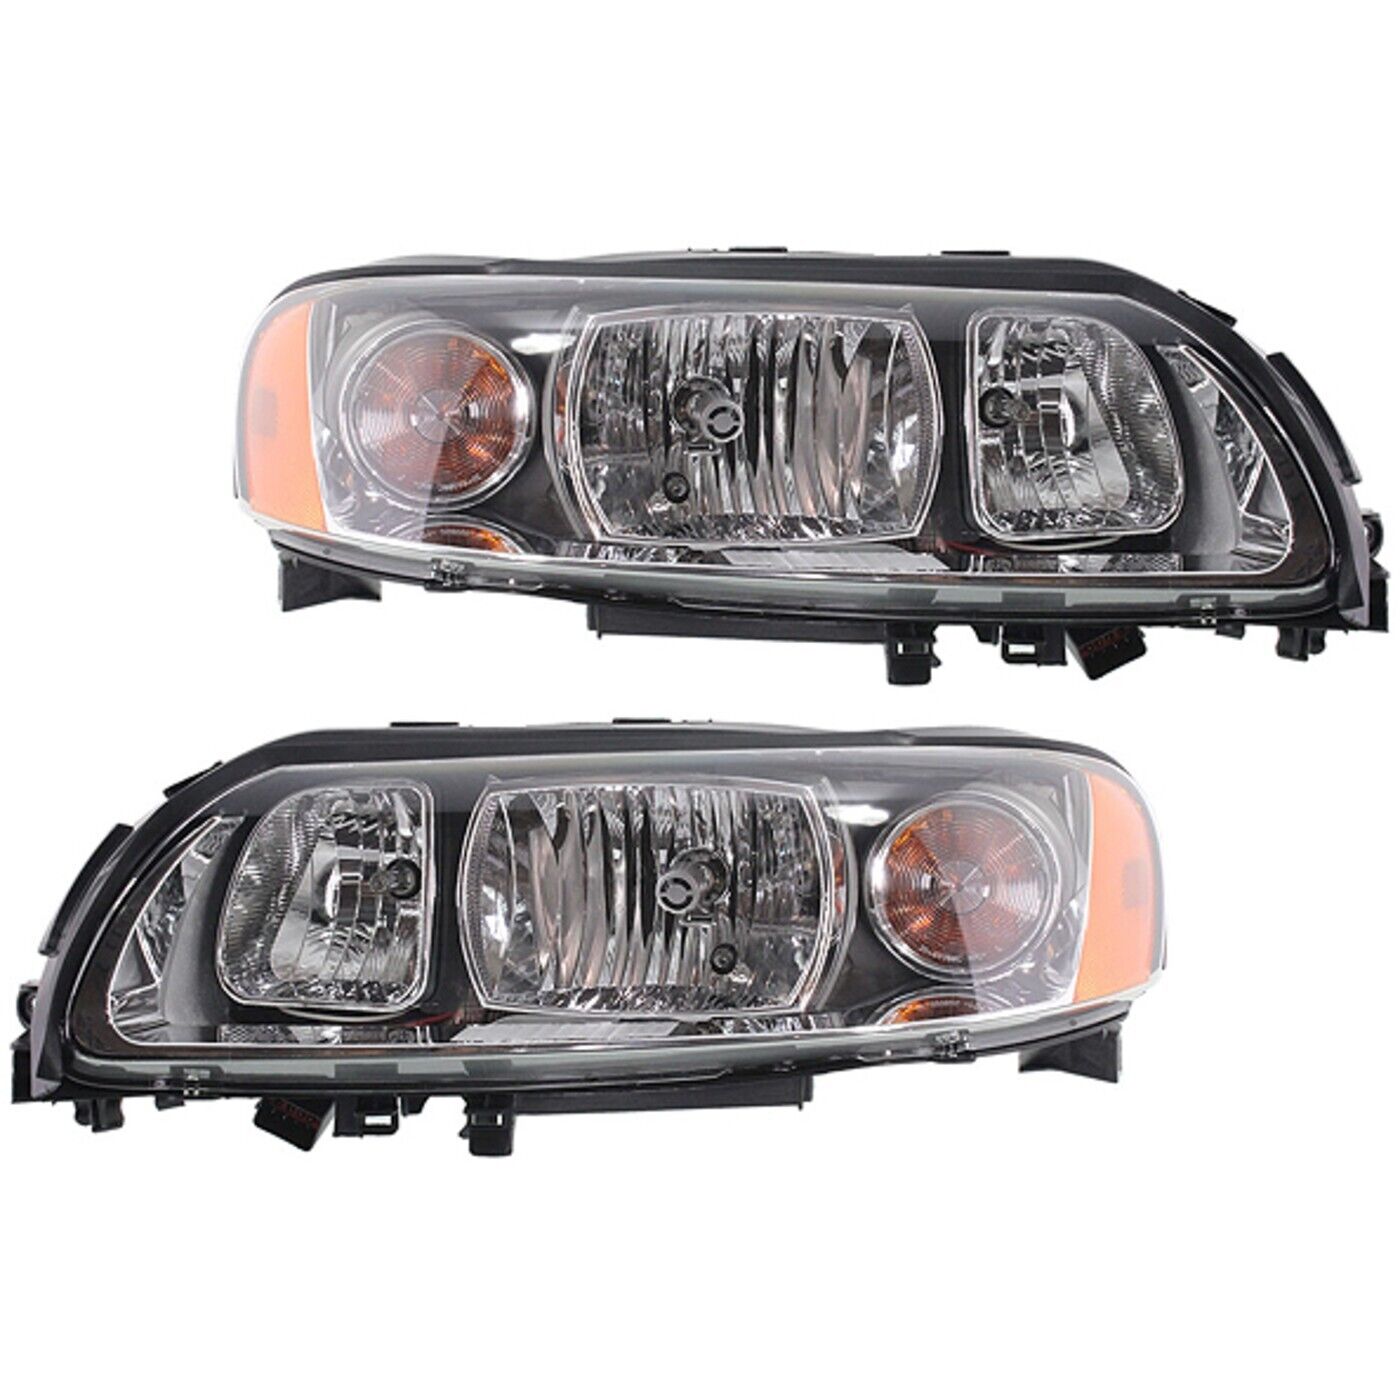 Headlight Asembly Set For 2005 2006 2007 Volvo V70 XC70 Left and Right With Bulb